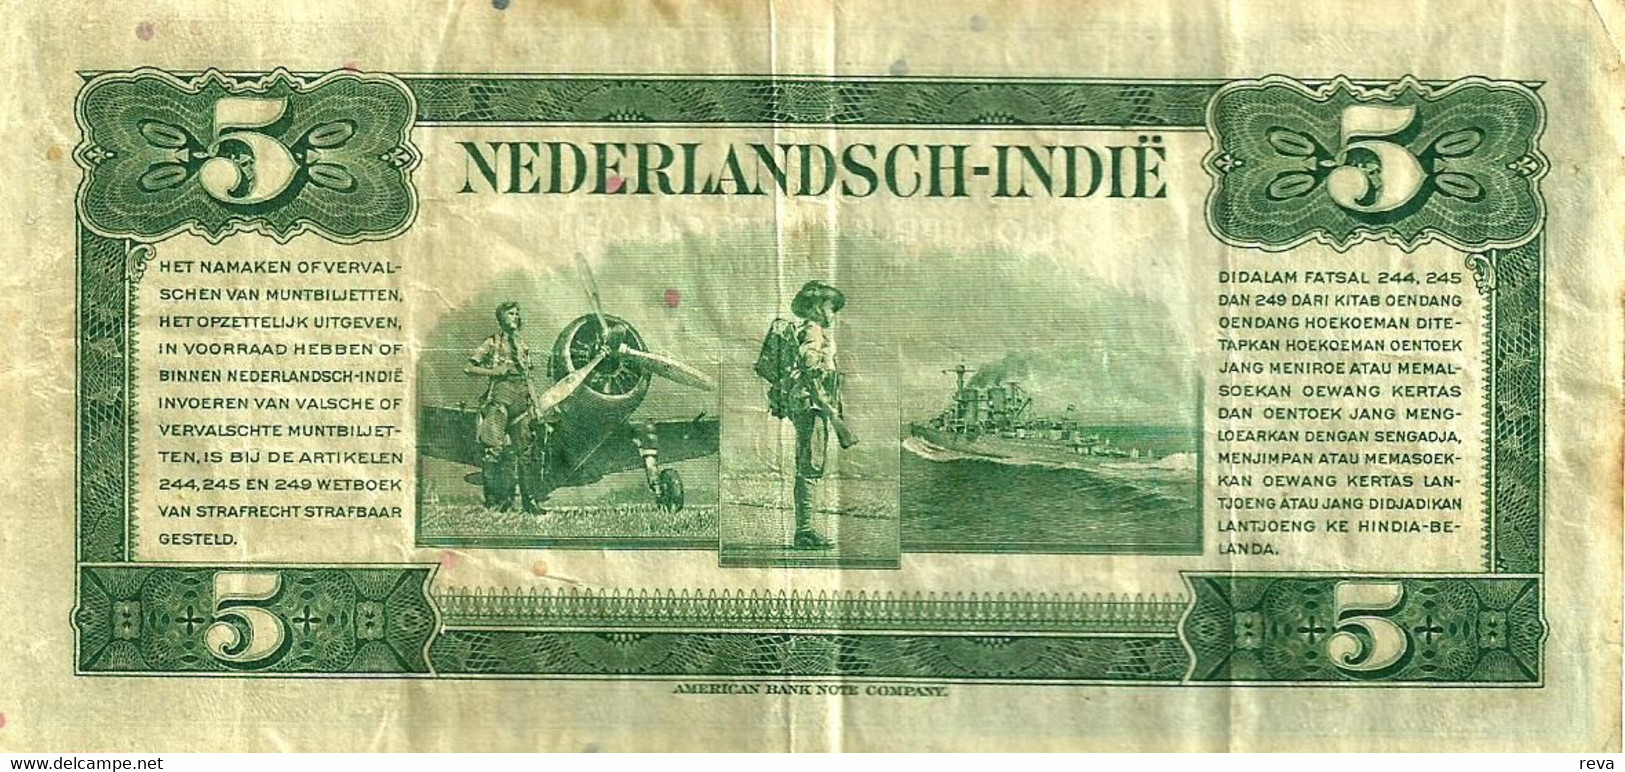 NETHERLANDS EAST INDIES 5 GULDEN BLUE WOMAN FRONT AIRPLANE SHIP BACK 02-03-1943 P.113 VF READ DESCRIPTION CAREFULLY !!! - Autres - Asie